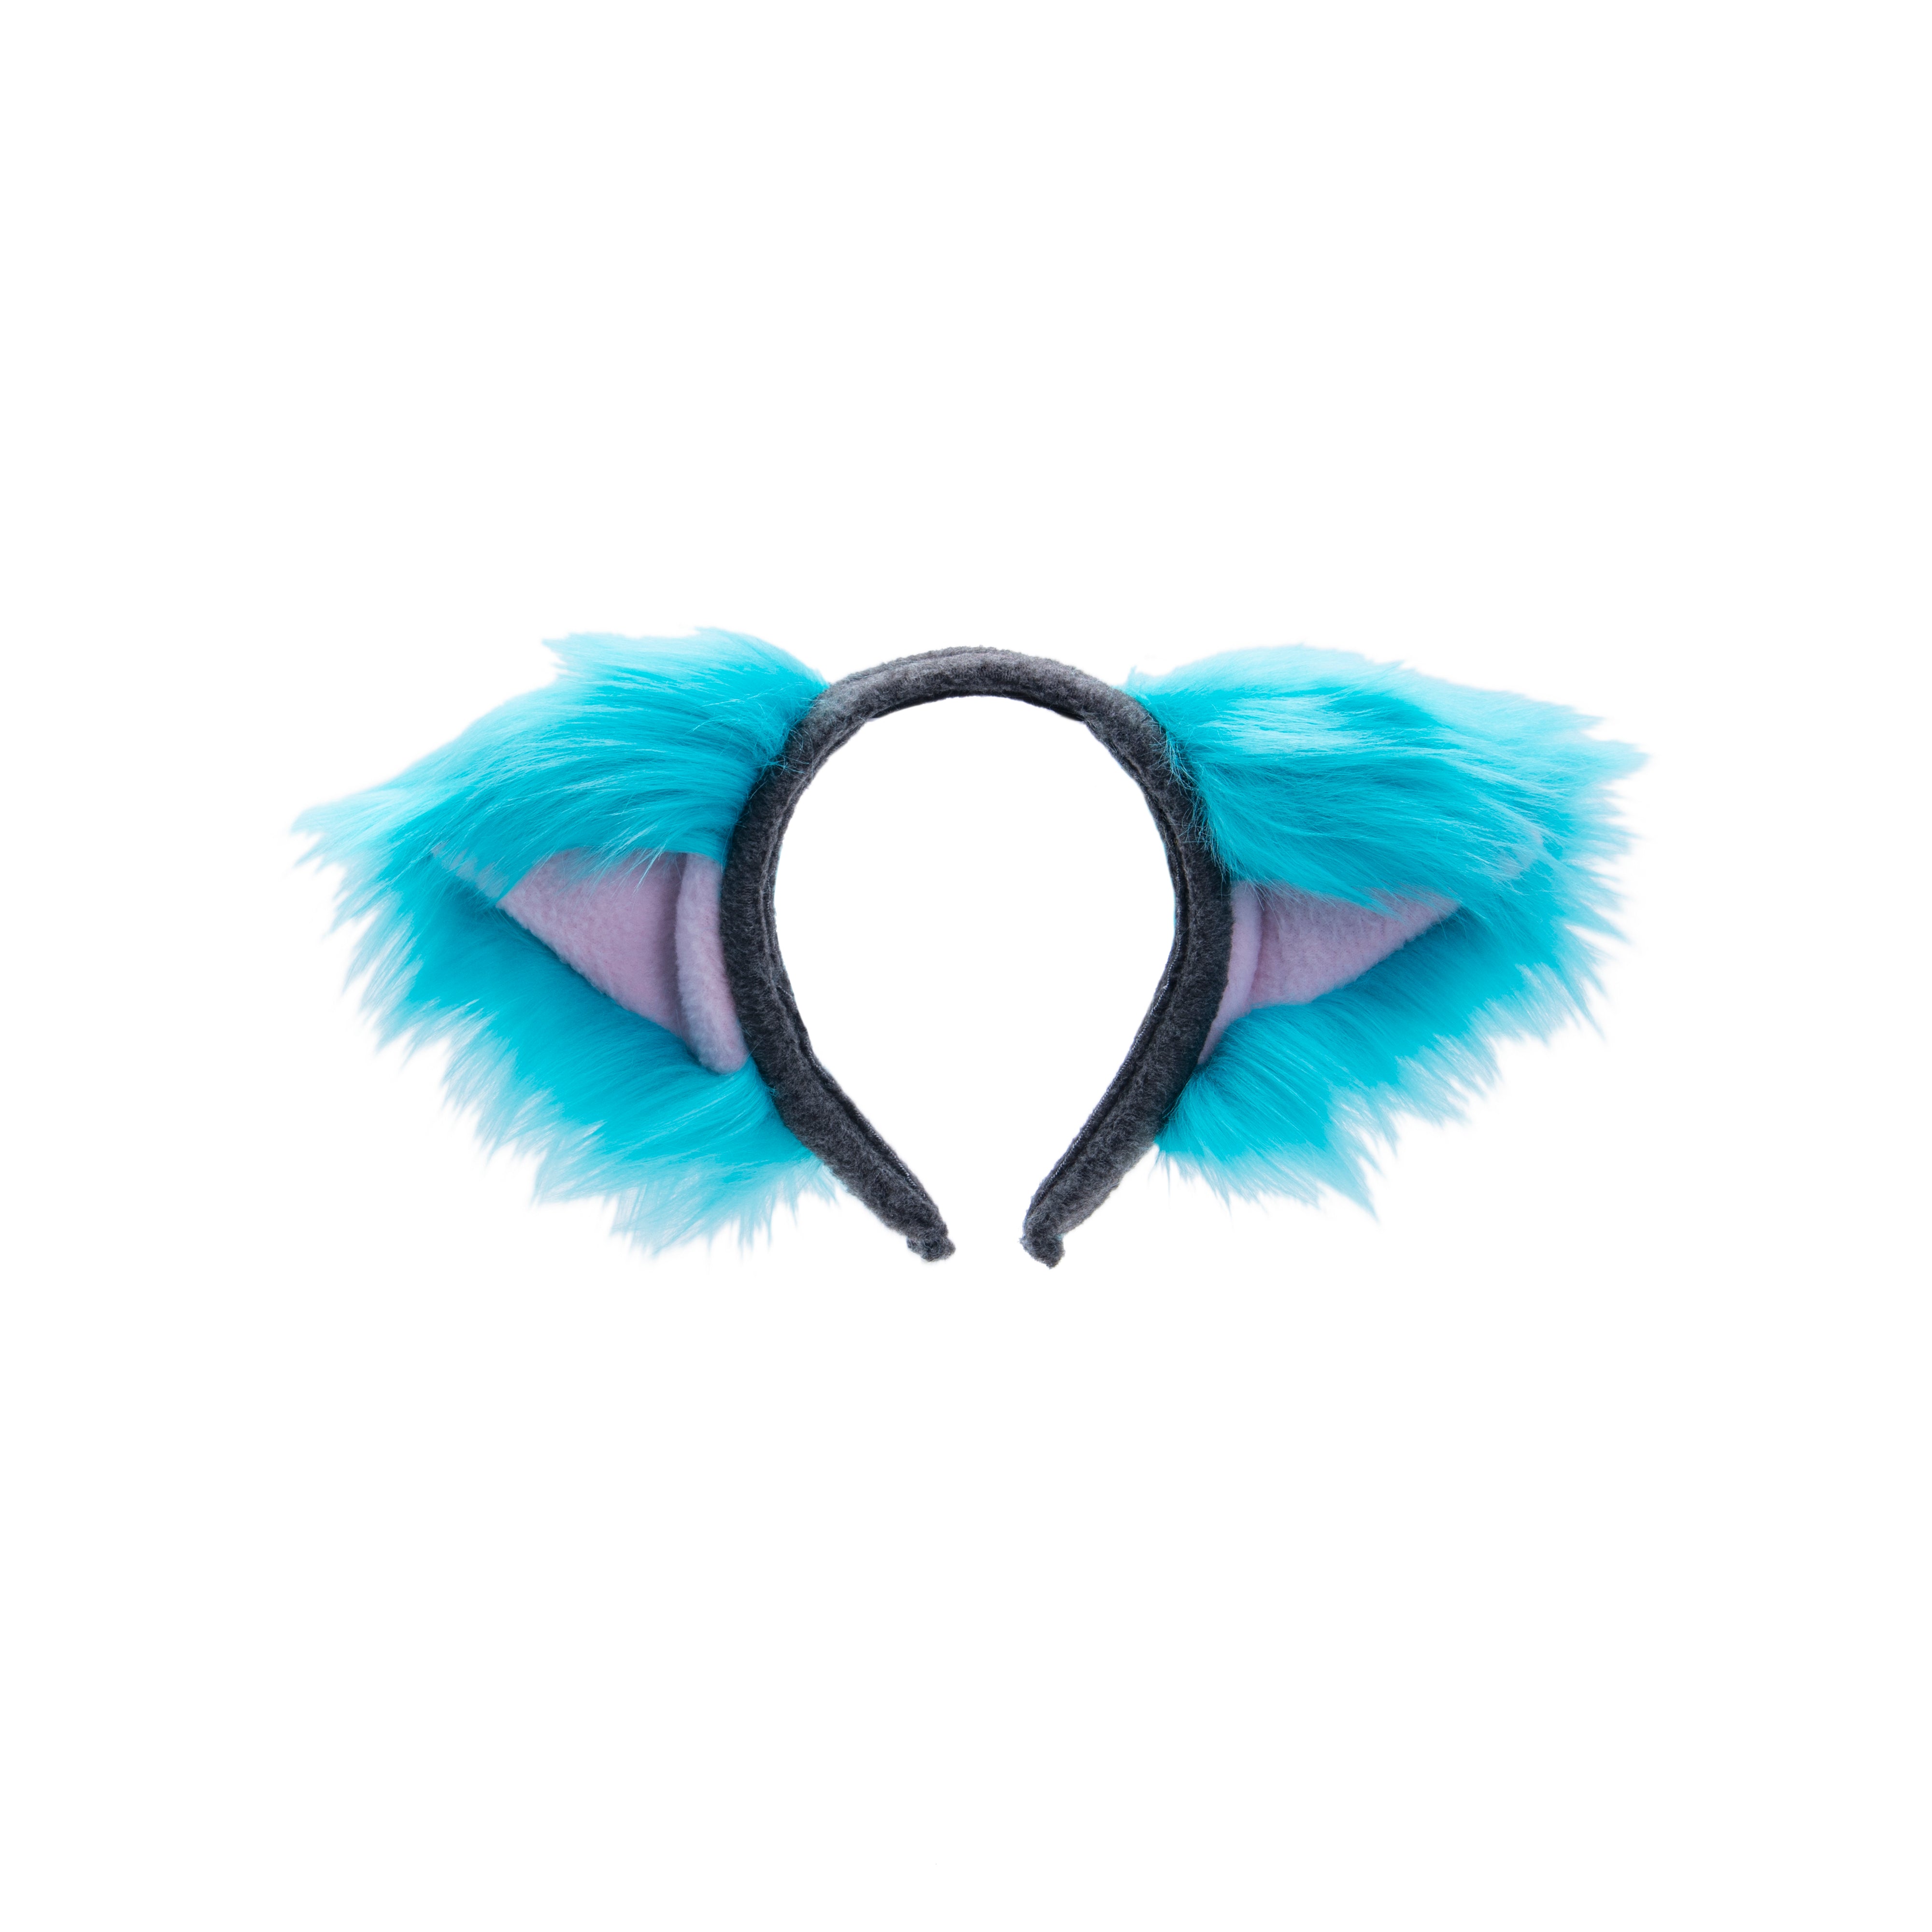 Pawstar Cheshire Fluffy Mew Ear Headband furry fluffy partial fursuit halloween costume or cosplay alice in wonderland accessory alternative tim buton turquoise and grey